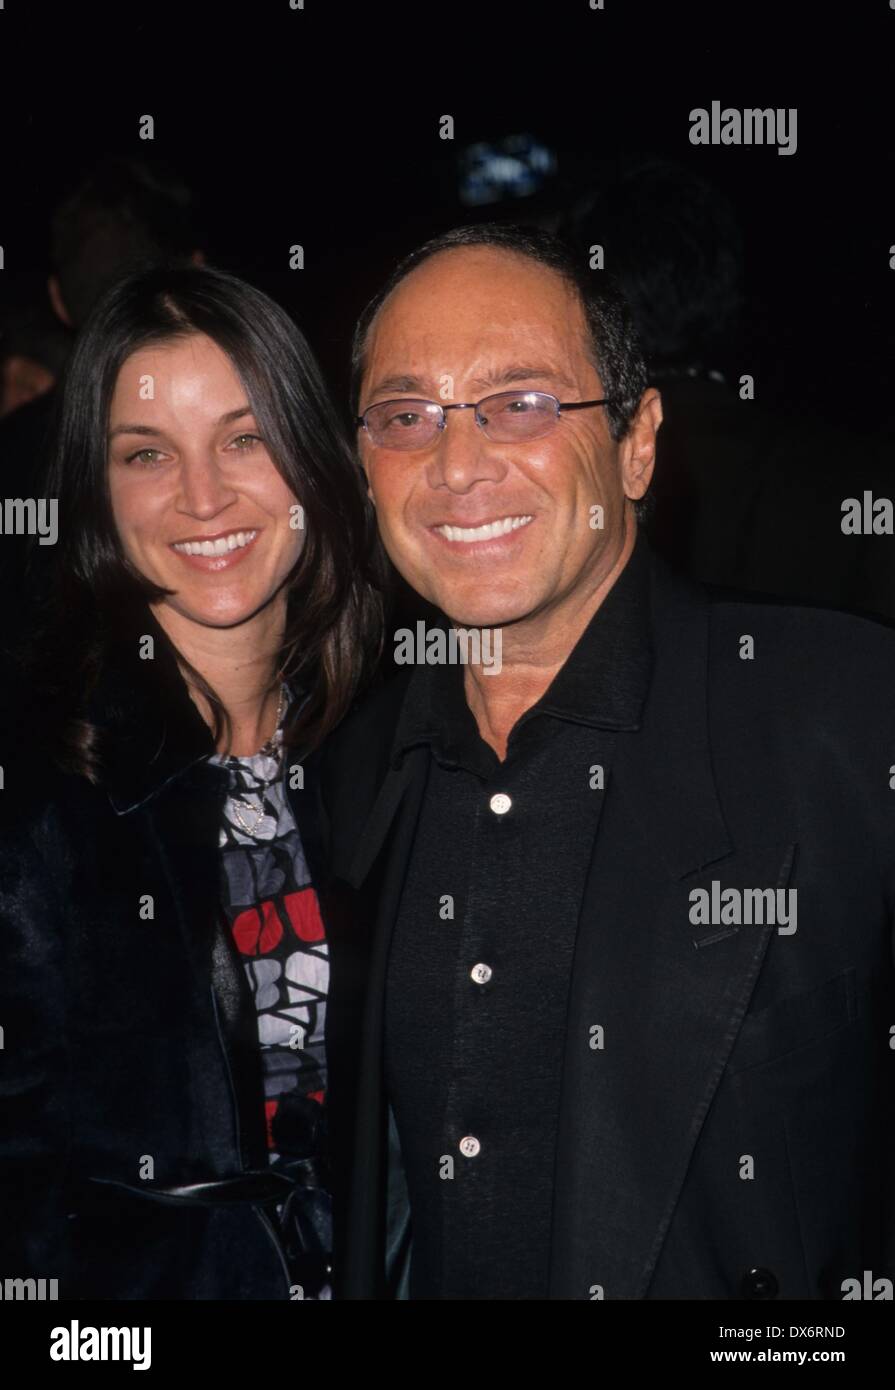 PAUL ANKA.3000 Miles to Graceland premiere at Manns Chinese Theatre in Hollywood, Ca. 2001.k21139psk.(Credit Image: © Paul Skipper/Globe Photos/ZUMAPRESS.com) Stock Photo